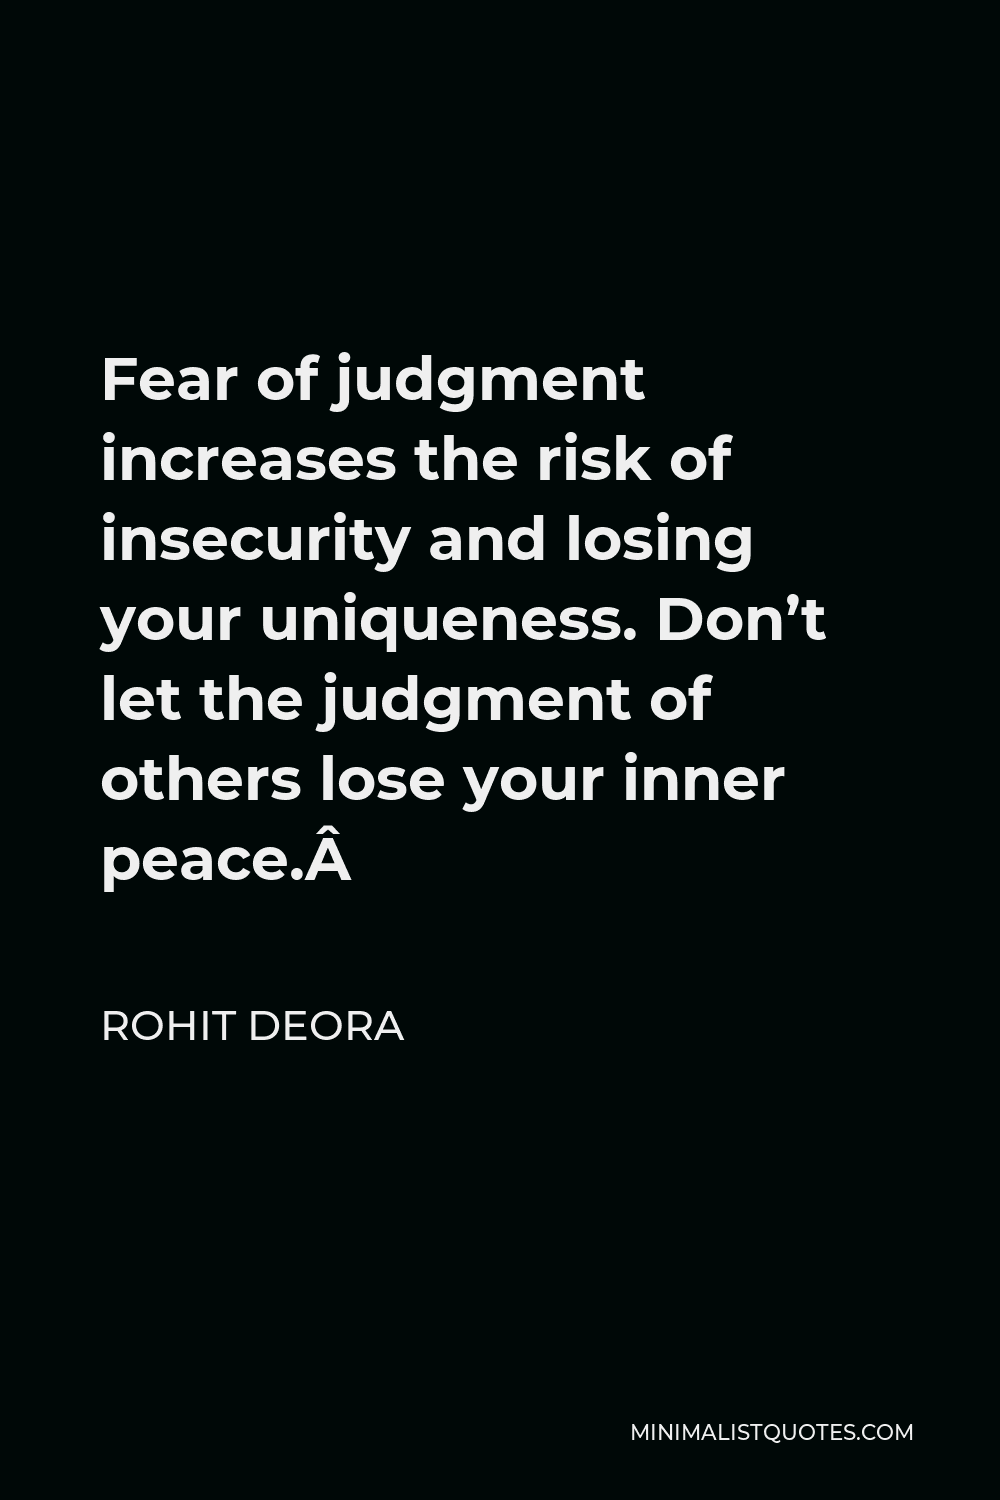 Rohit Deora Quote - Fear of judgment increases the risk of insecurity and losing your uniqueness. Don’t let the judgment of others lose your inner peace. 